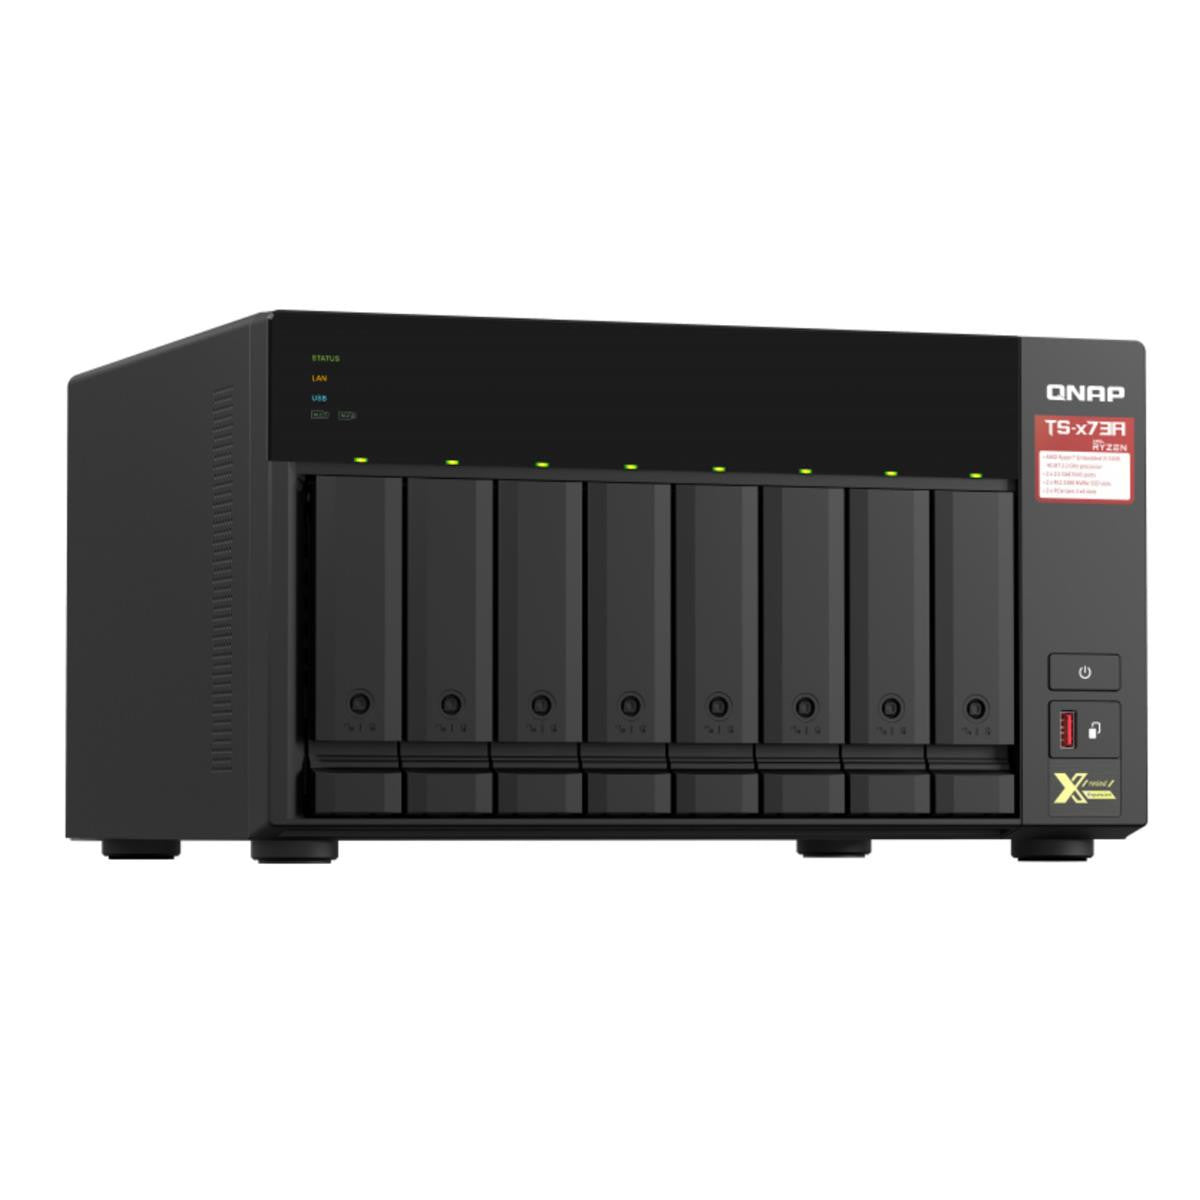 QNAP TS-873A 8-BAY NAS with 16GB DDR4 RAM and 16TB (8x2TB) Seagate Ironwolf NAS Drives Fully Assembled and Tested